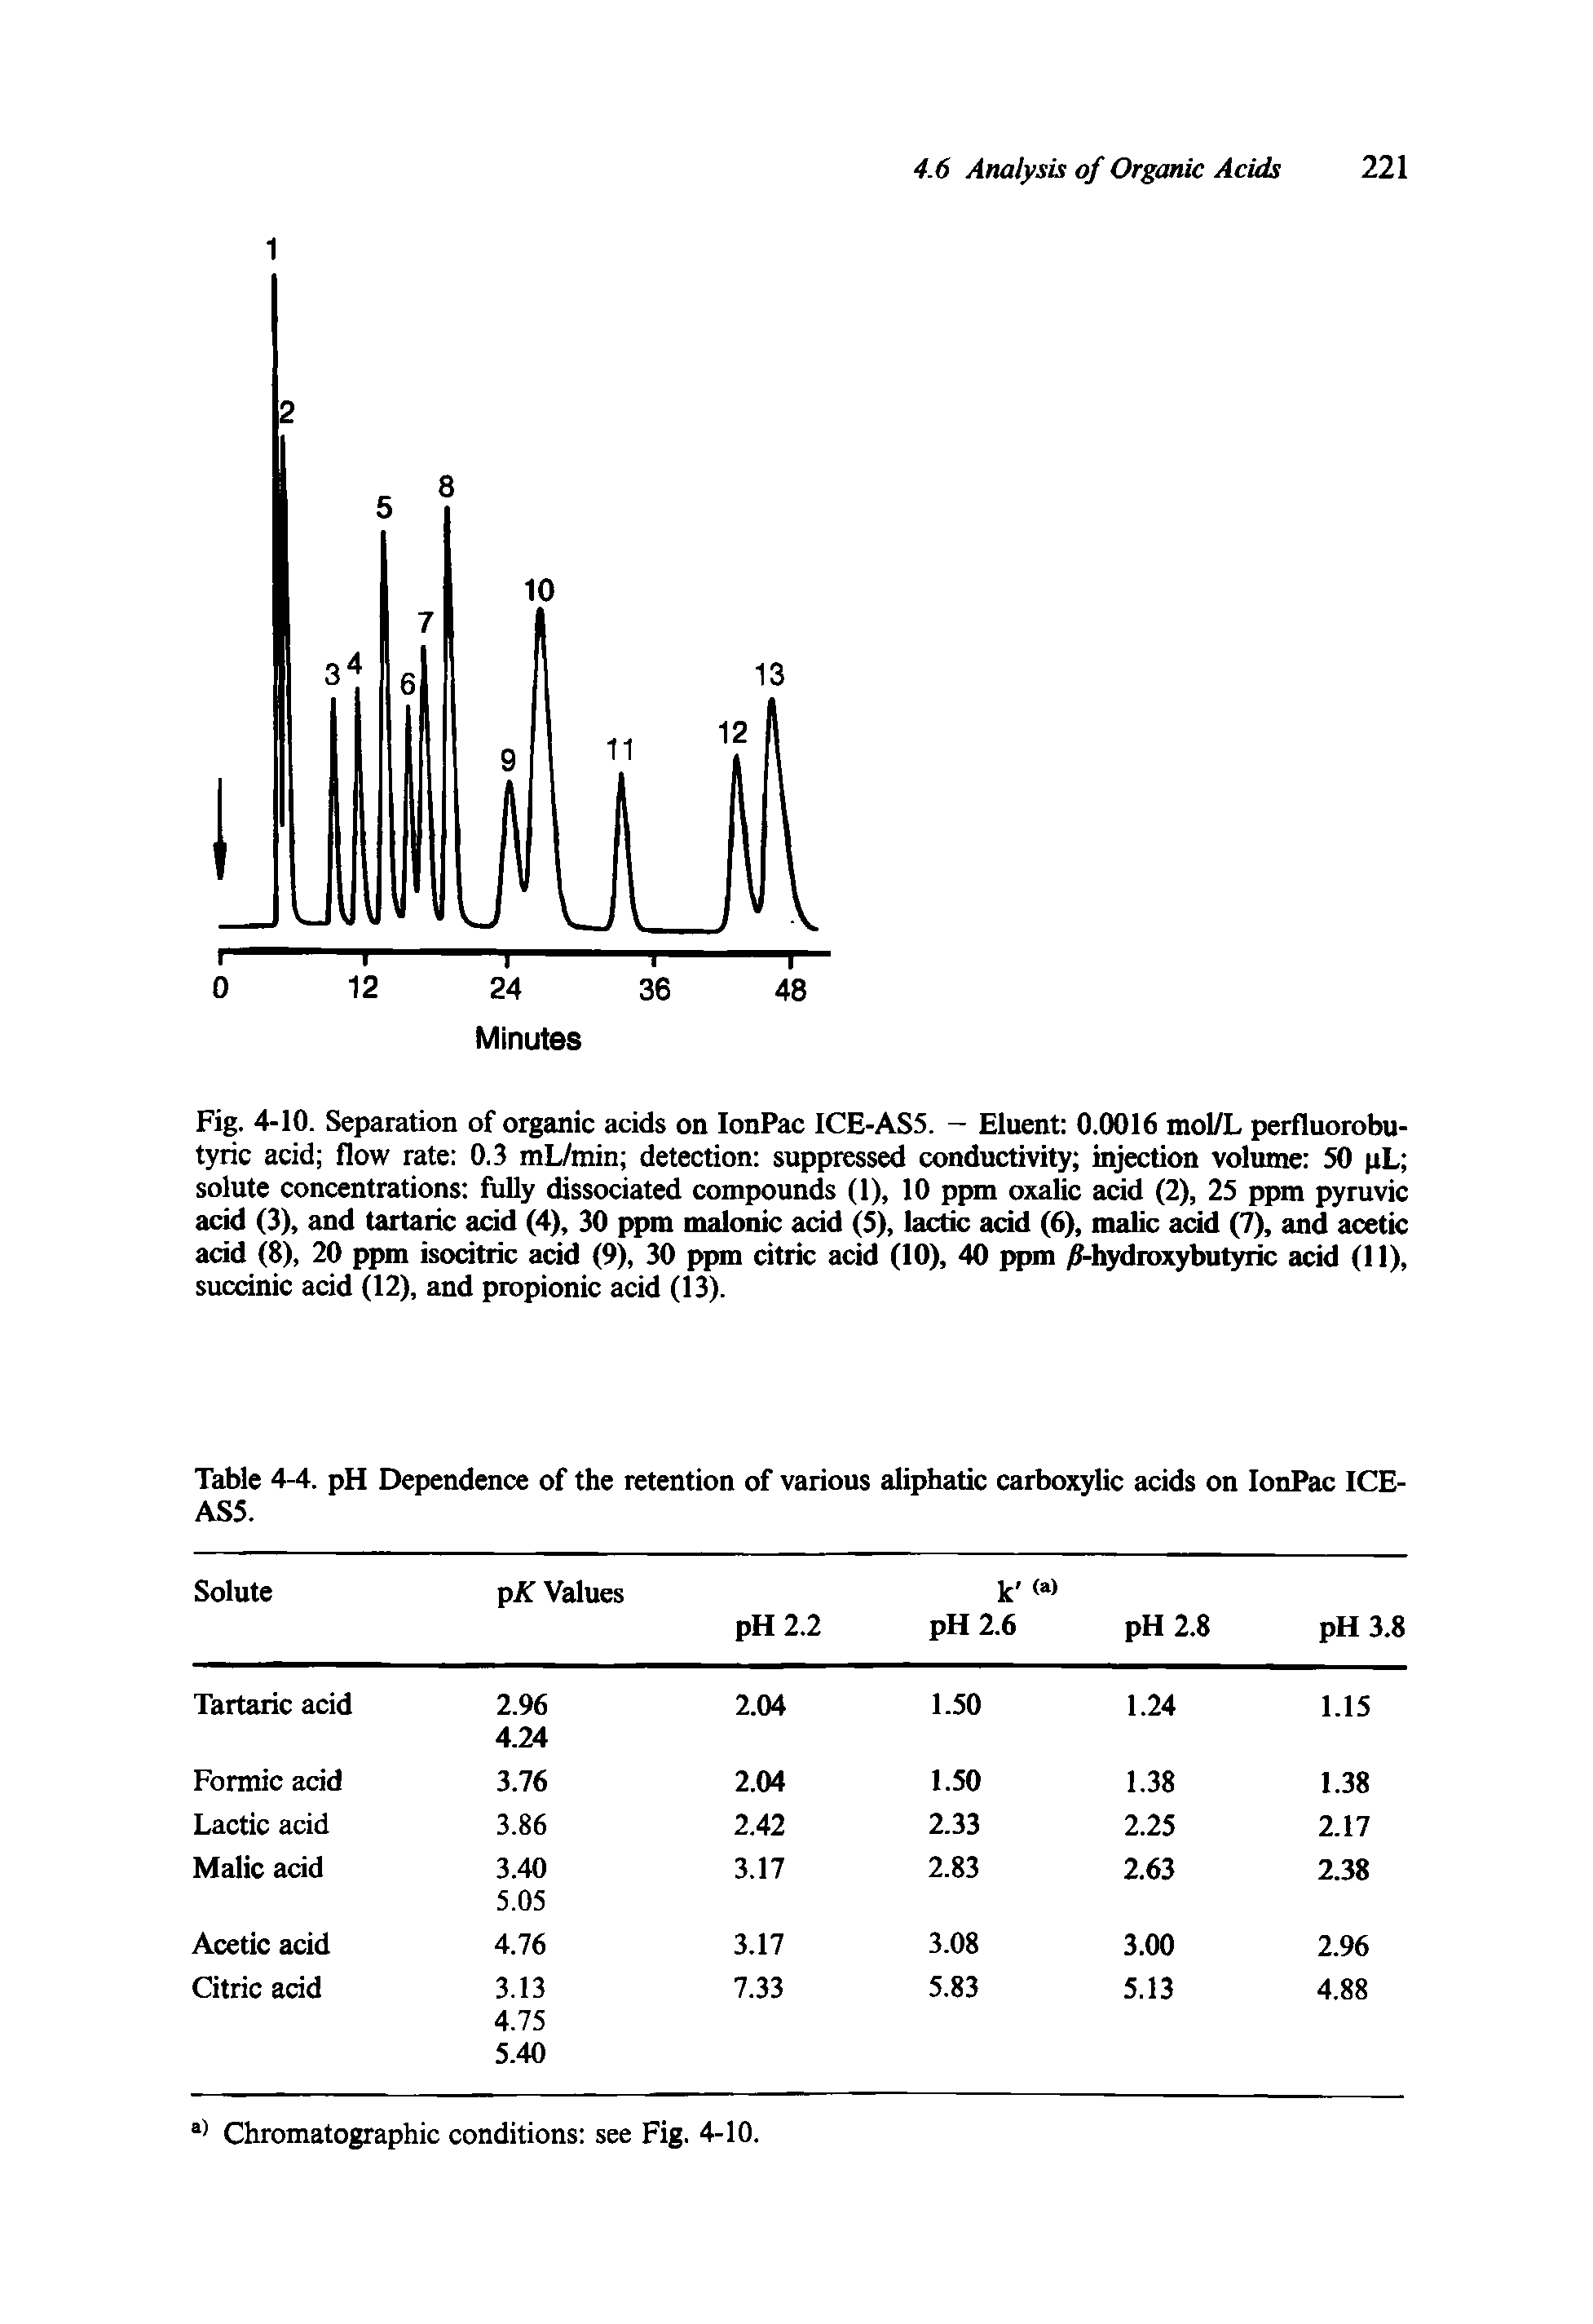 Fig. 4-10. Separation of organic acids on IonPac ICE-AS5. - Eluent 0.0016 mol/L perfluorobu-tyric acid flow rate 0.3 mL/min detection suppressed conductivity injection volume 50 pL solute concentrations fully dissociated compounds (1), 10 ppm oxalic acid (2), 25 ppm pyruvic acid (3), and tartaric acid (4), 30 ppm malonic acid (5), lactic acid (6), malic acid (7), and acetic acid (8), 20 ppm isodtric acid (9), 30 ppm citric acid (10), 40 ppm / -hydroxybutyric acid (11), succinic acid (12), and propionic acid (13).